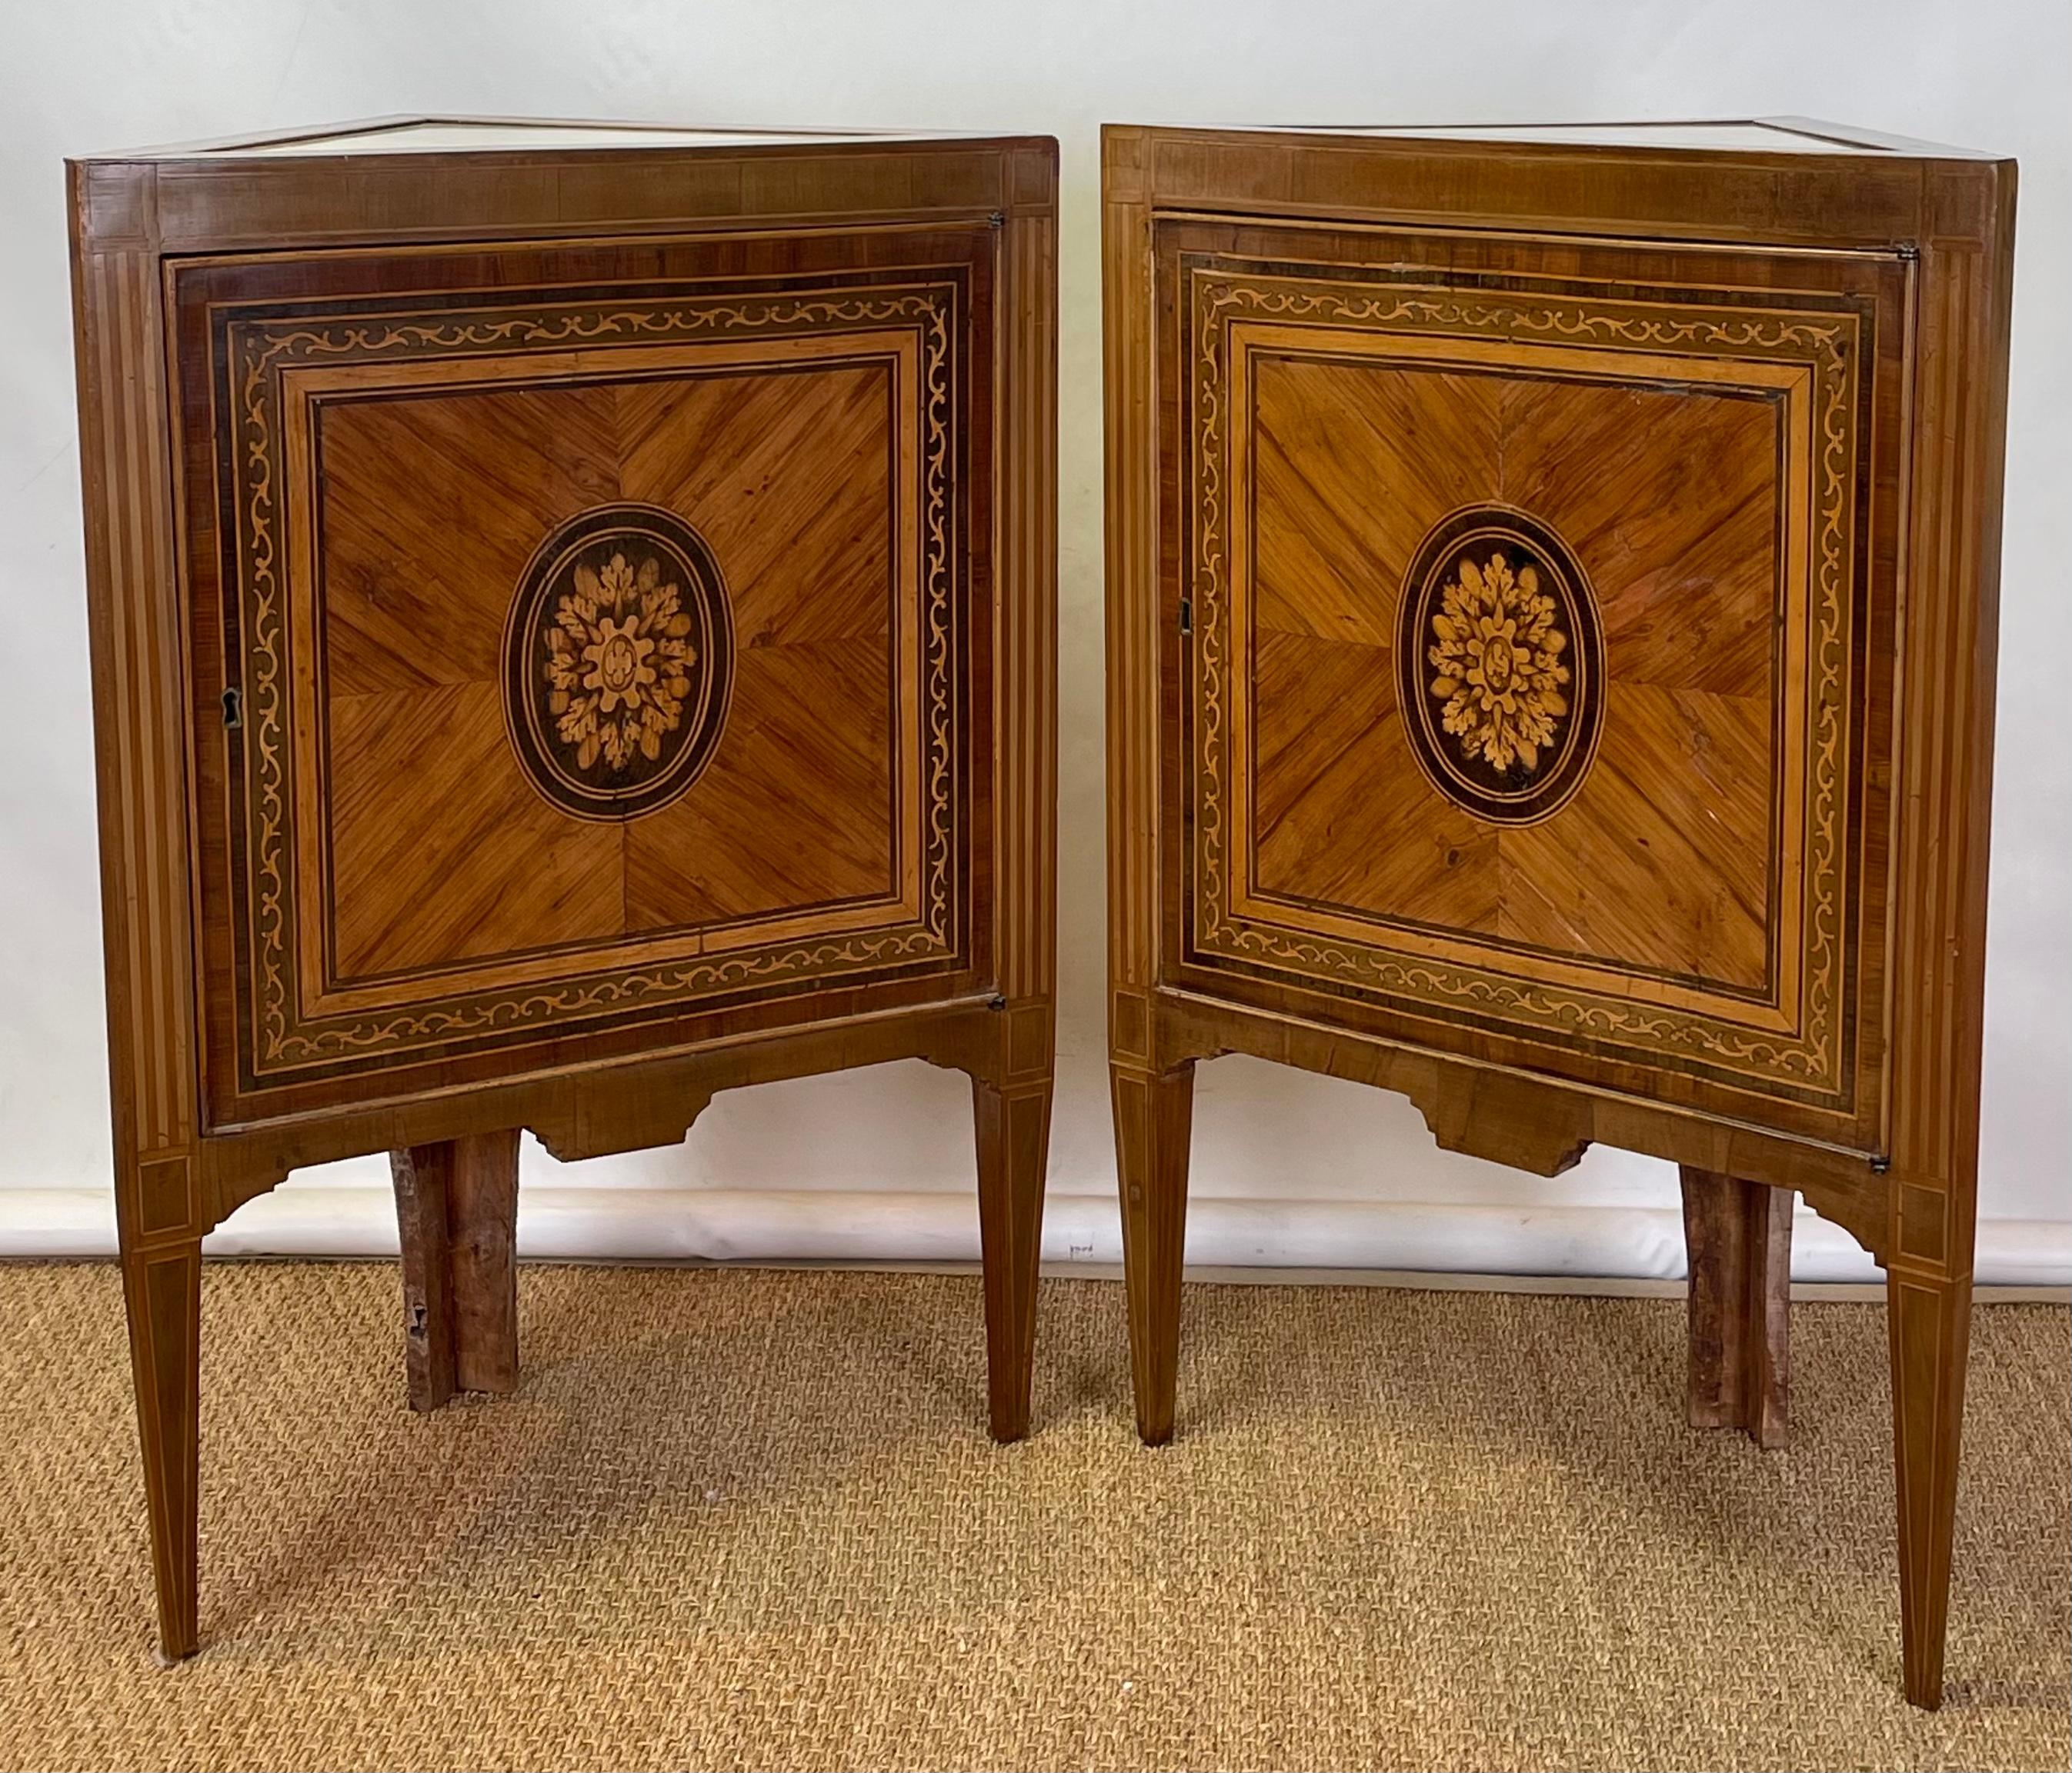 A fine pair of early 19th C. Italian Neoclassical corner cabinets with inset marble tops and marquetry inlaid doors resting on square tapering legs.